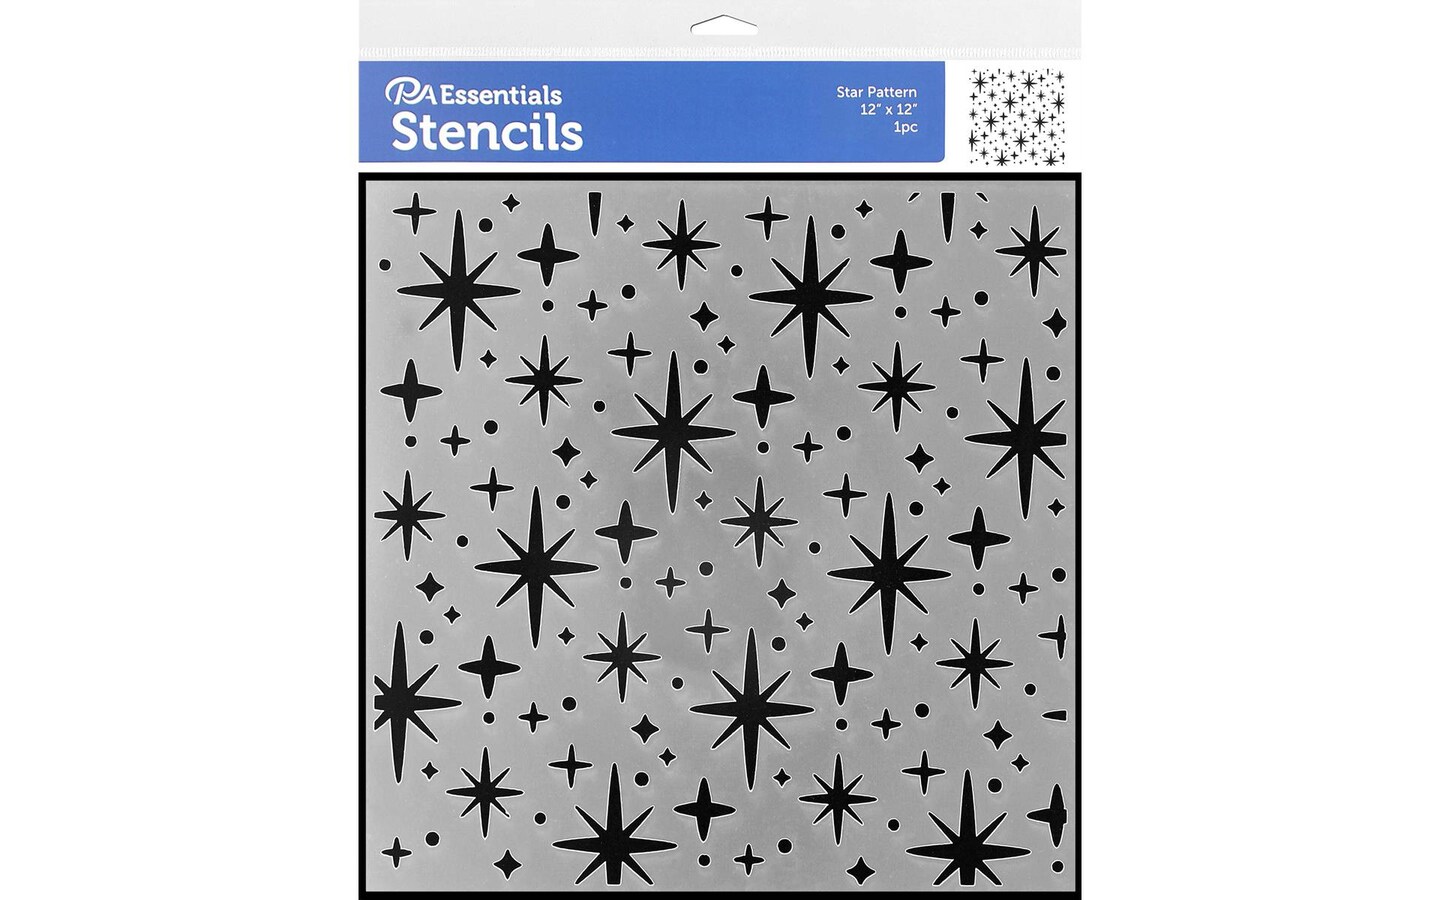 DIY Craft Star Stencils for Painting on Wood,Fabric,Walls Art